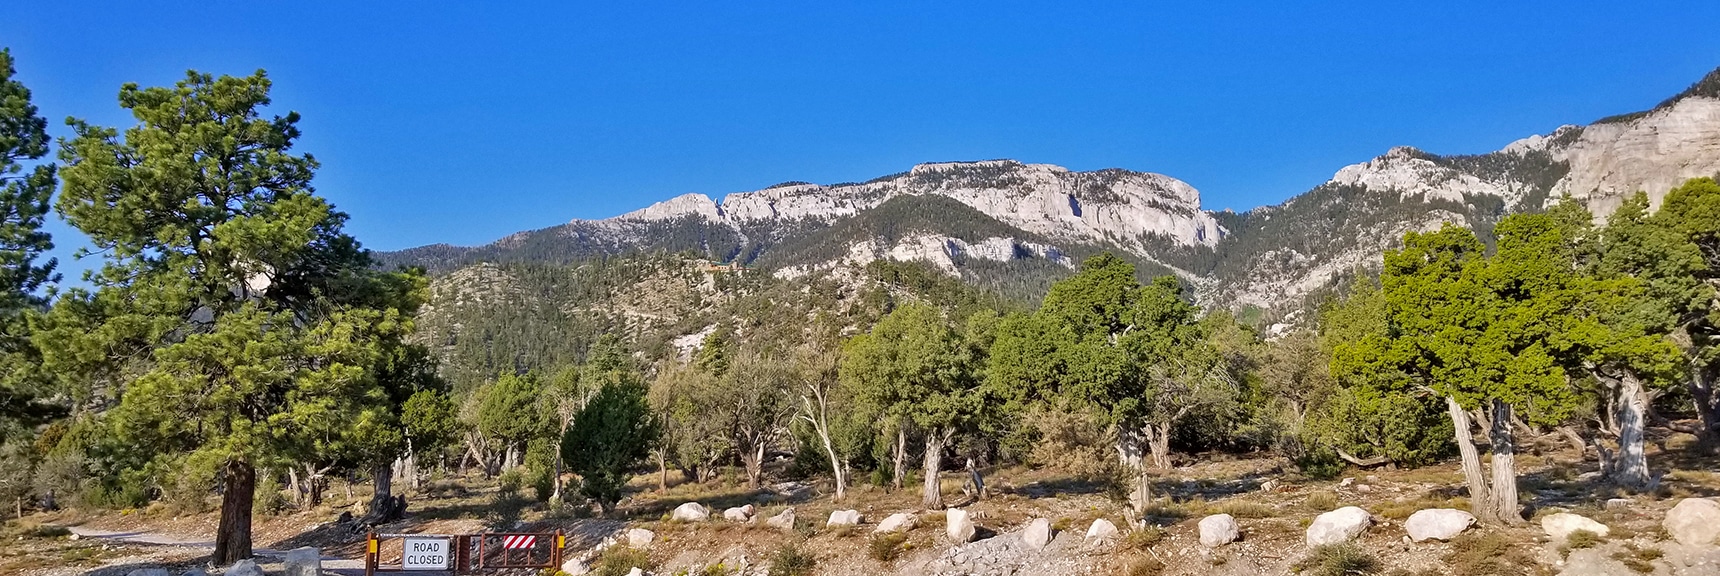 Overview of Area Covered in This Adventure: Base of Mummy Cliffs to Fletcher Peak | Deer Creek Rd - Mummy Cliffs - Mummy Springs - Raintree - Fletcher Peak - Cougar Ridge Trail Circuit | Mt Charleston Wilderness | Spring Mountains, Nevada